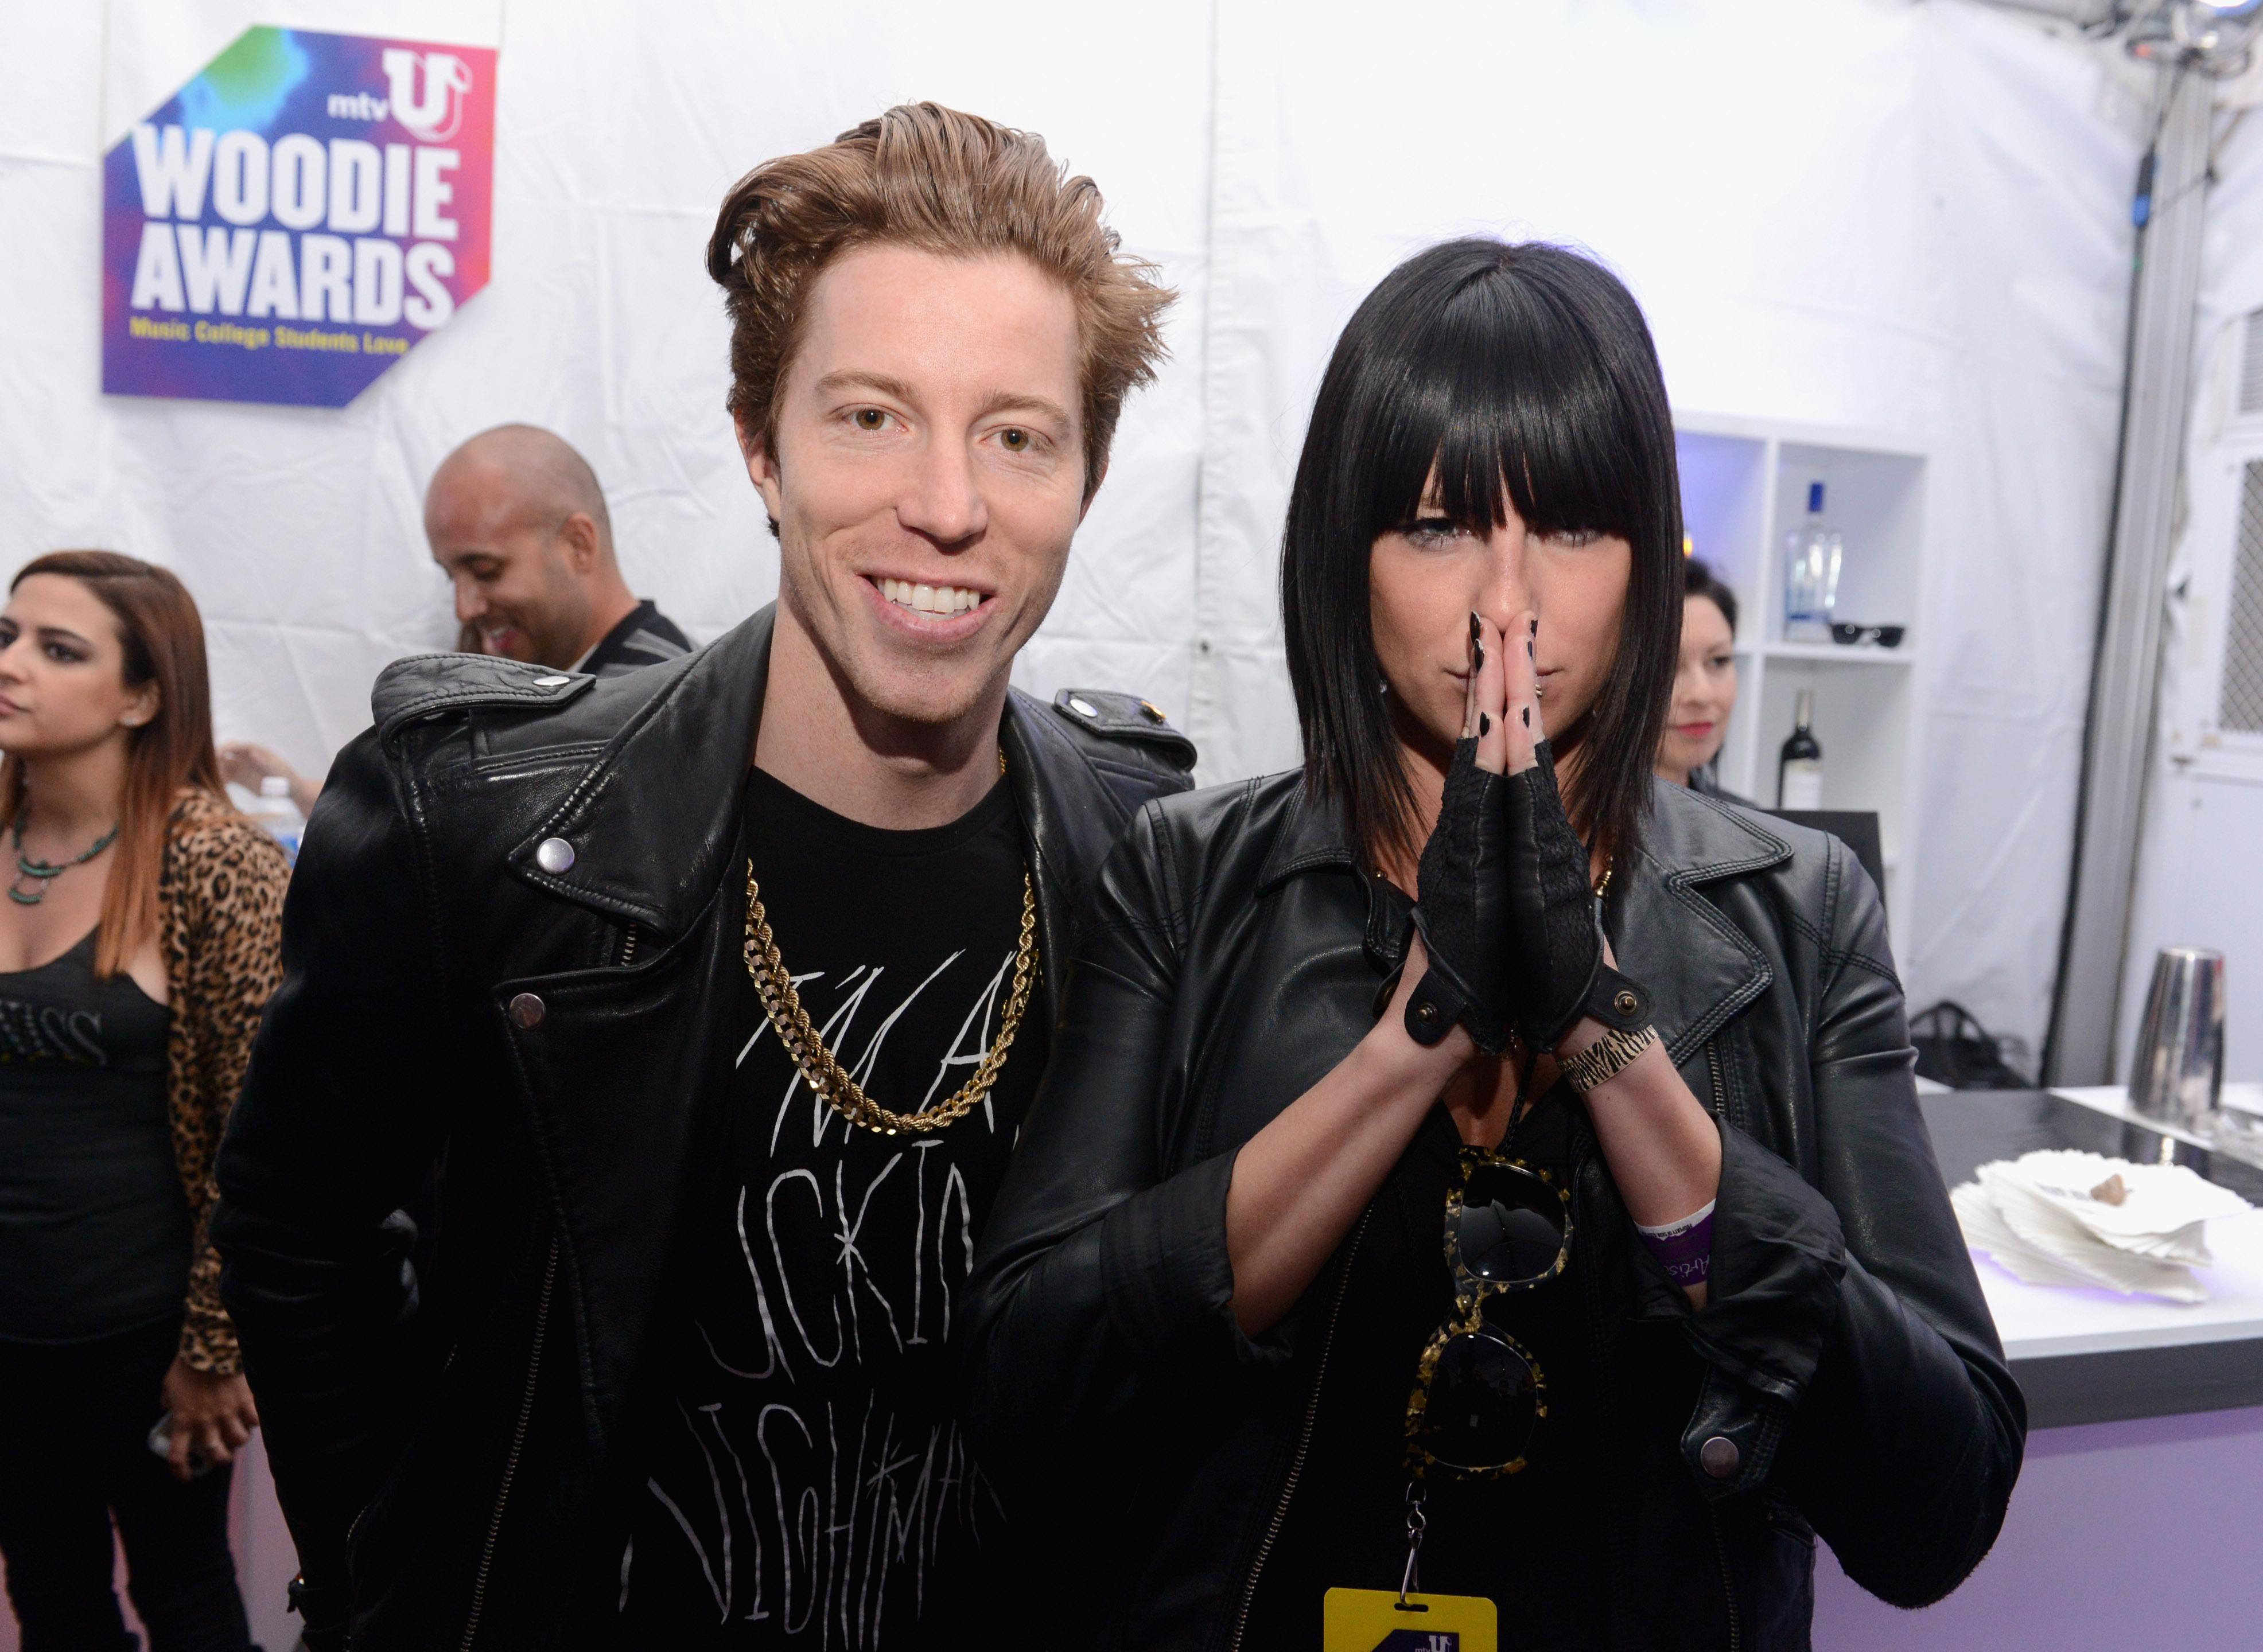 Snowboarder Shaun White (L) and musician Sarah Barthel, of Phantogram, attend the 2014 mtvU Woodie Awards and Festival on March 13, 2014 in Austin, Texas. 